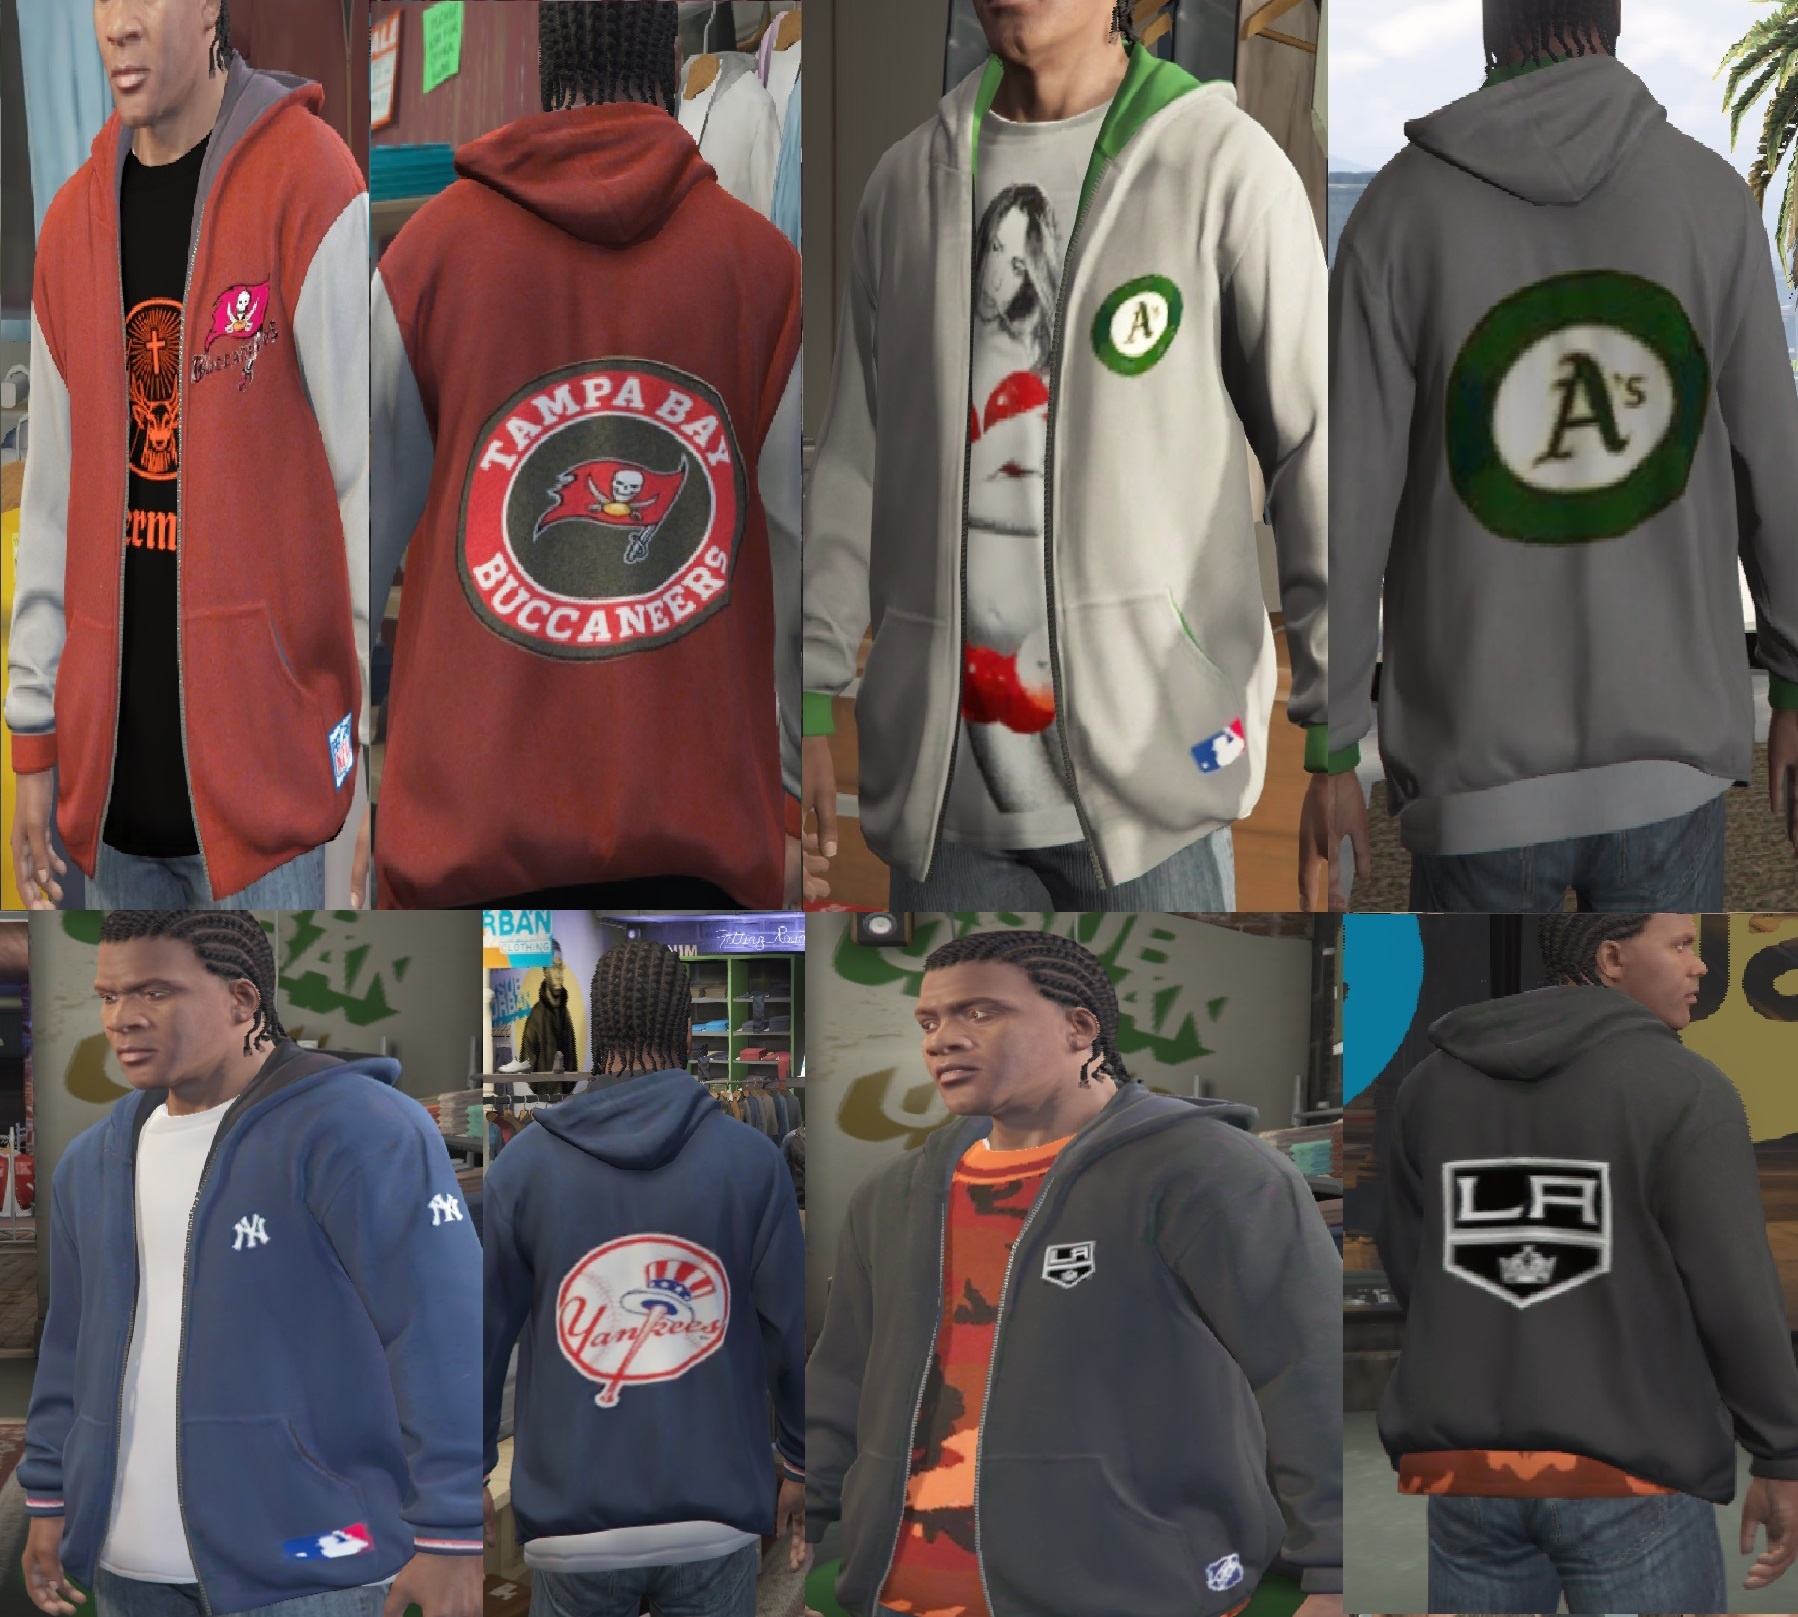 gta online outfits